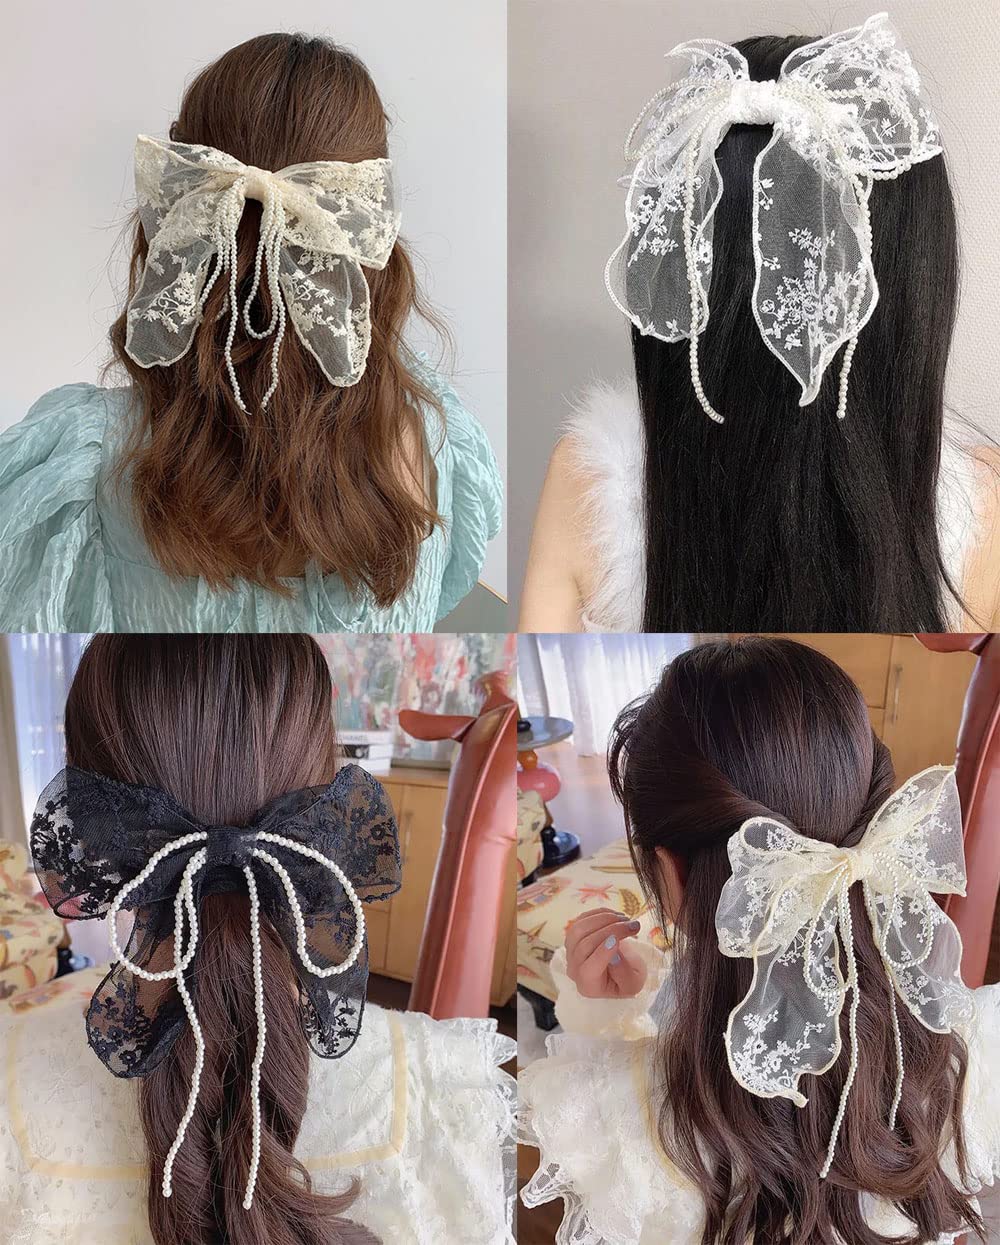 Sovenny 3 Pieces Lace Bow Pearl Chain Hair Clips Flower Embroidery Non Slip Hair Bow Barrettes for Women and Girls (White, Beige, Black)